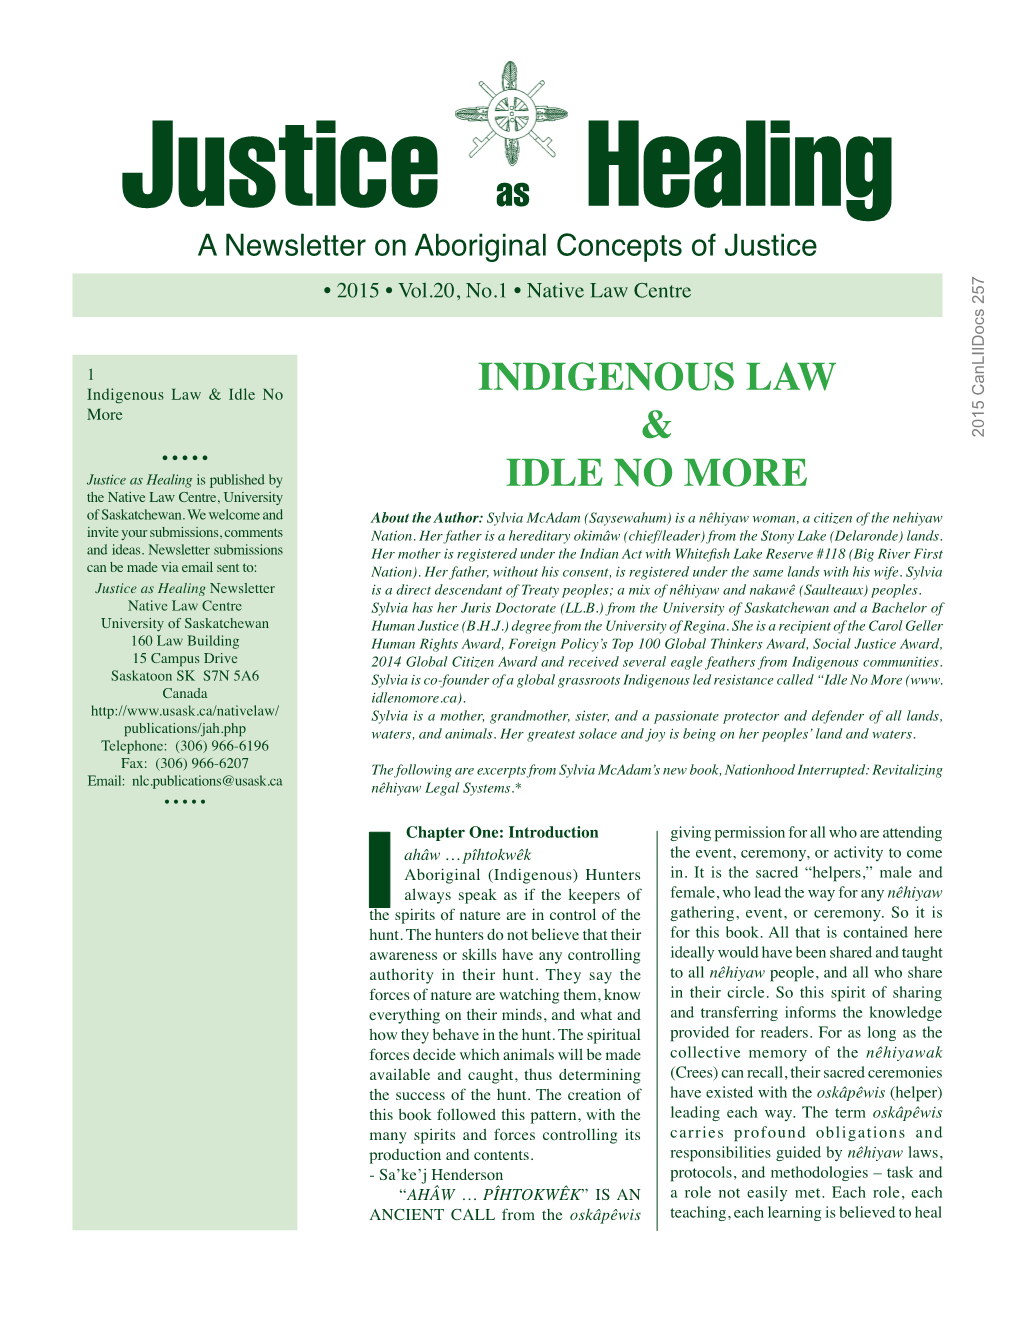 Indigenous Law & Idle No More